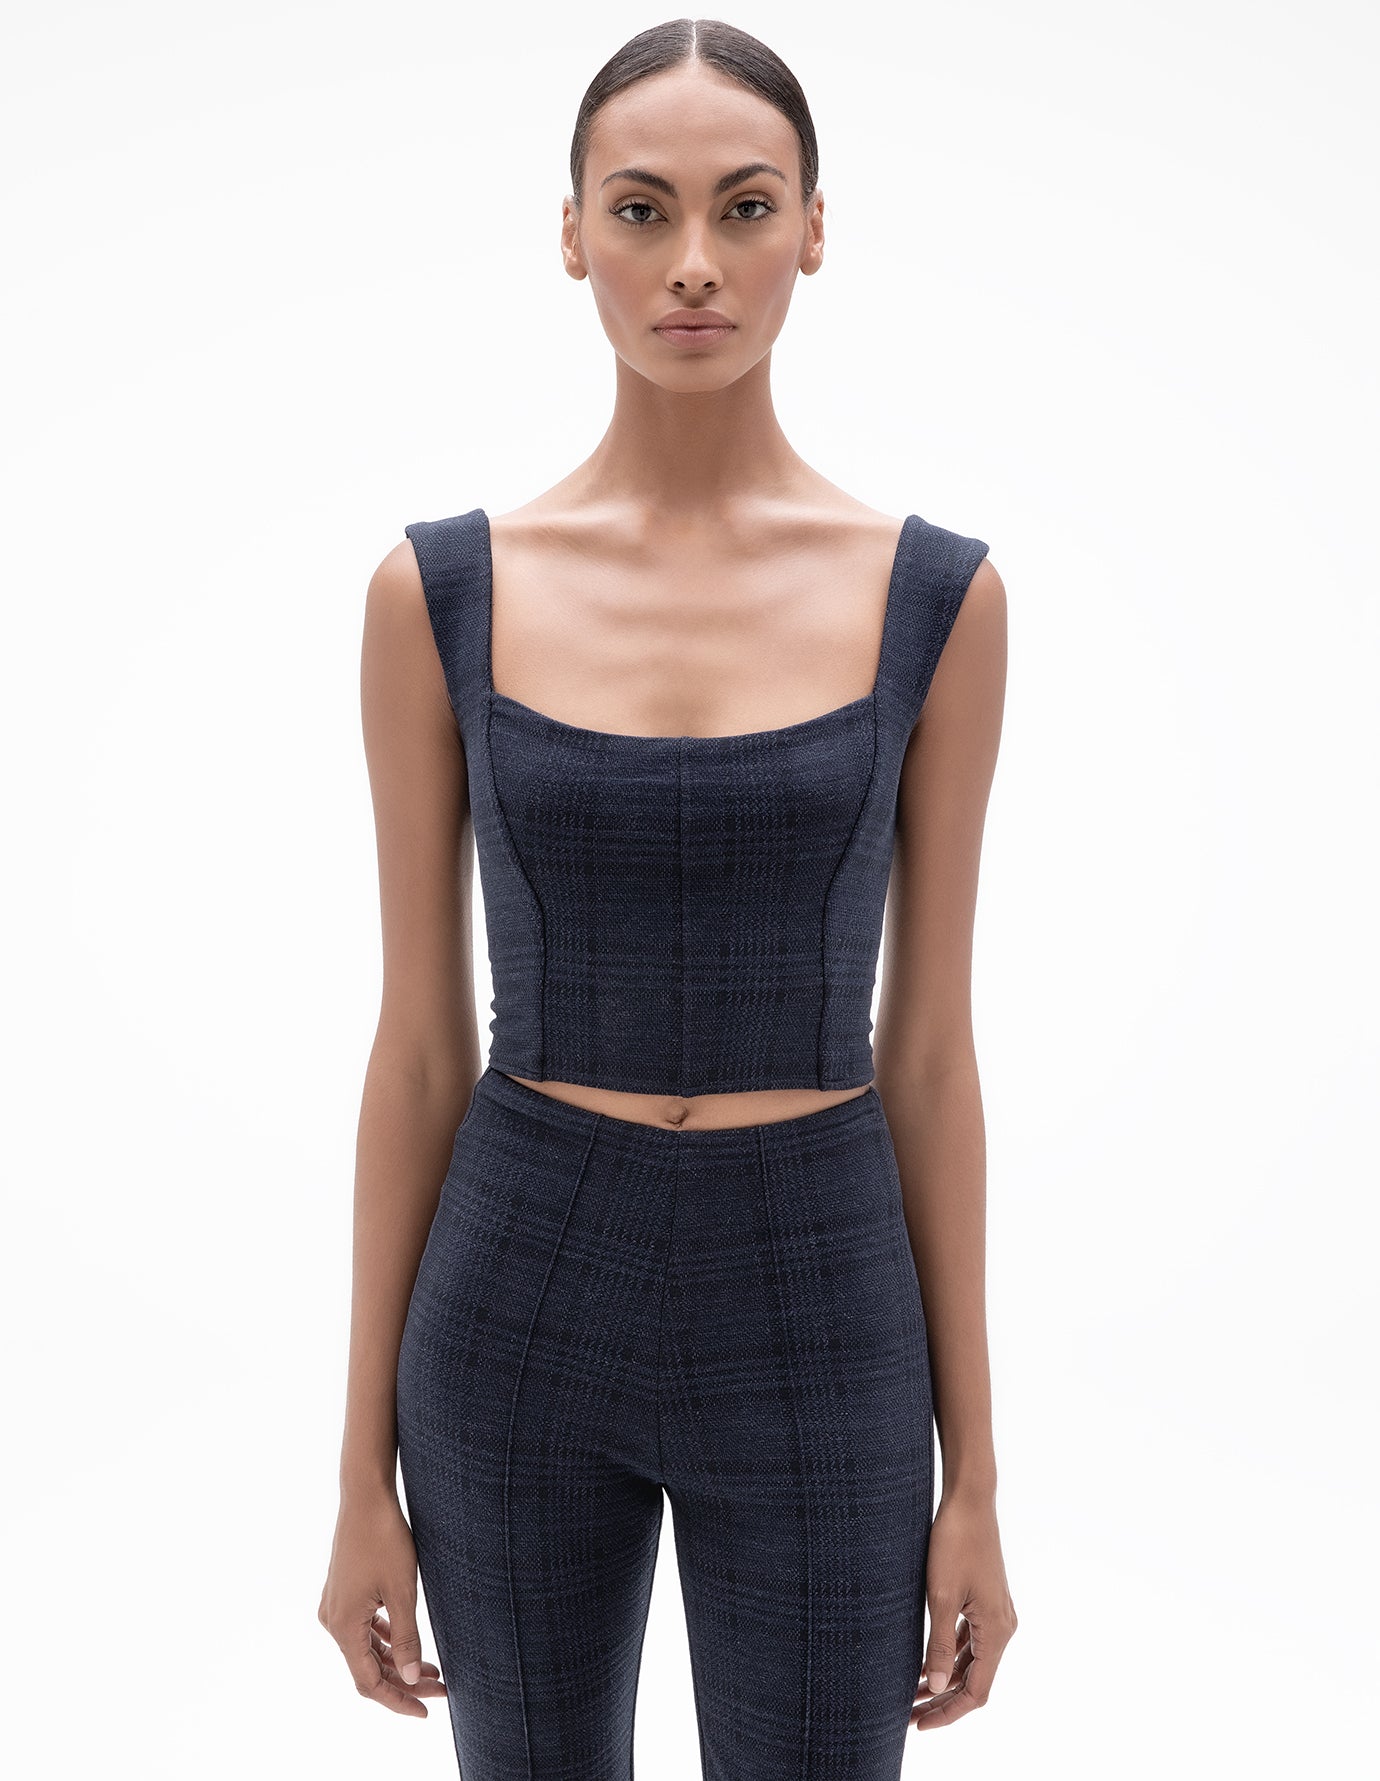 MADISON BUSTIER TOP by IN NAVY ONA Yoon Chung –